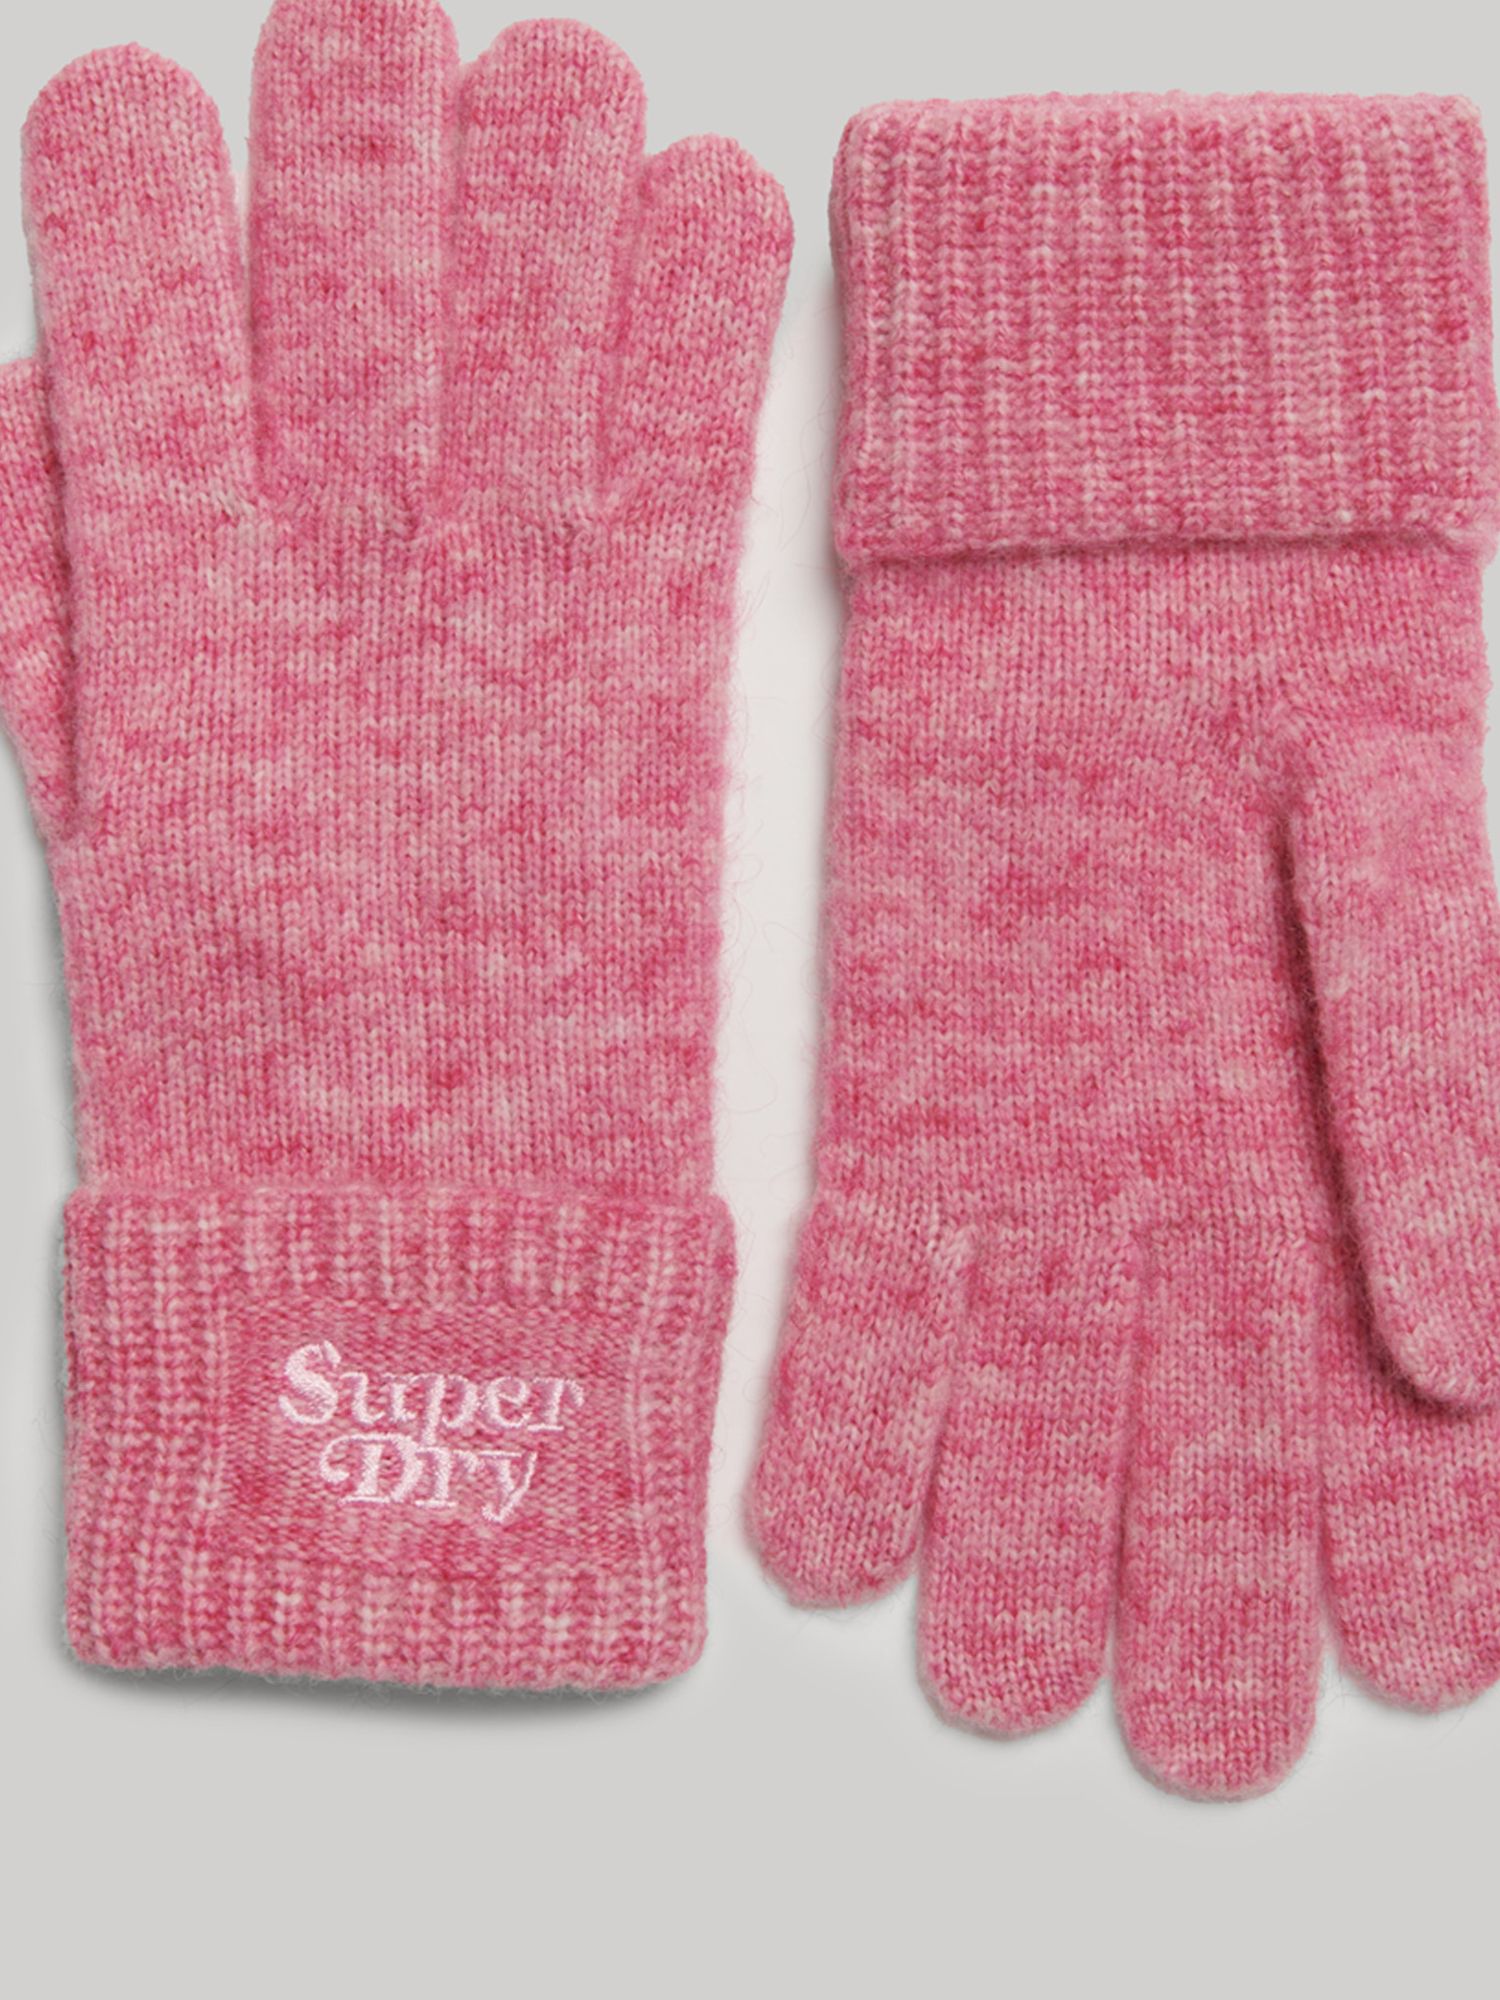 Superdry Wool Blend Gloves, Chateau Rose Pink at John Lewis & Partners